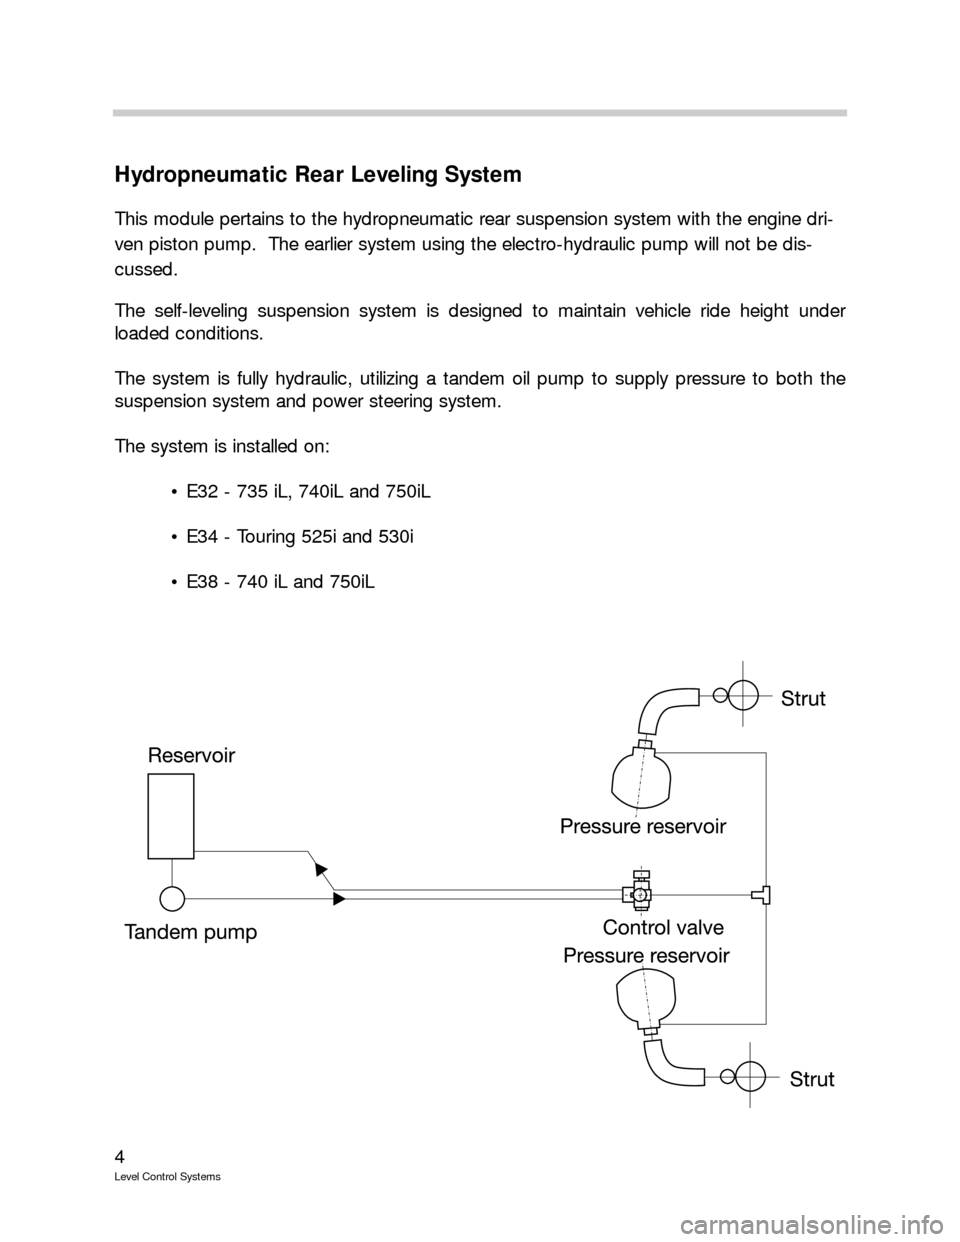 BMW 750IL 1991 E32 Level Control System Manual 4
Level Control Systems
Hydropneumatic Rear Leveling System
This module pertains to the hydropneumatic rear suspension system with the engine dri-
ven piston pump.  The earlier system using the electr